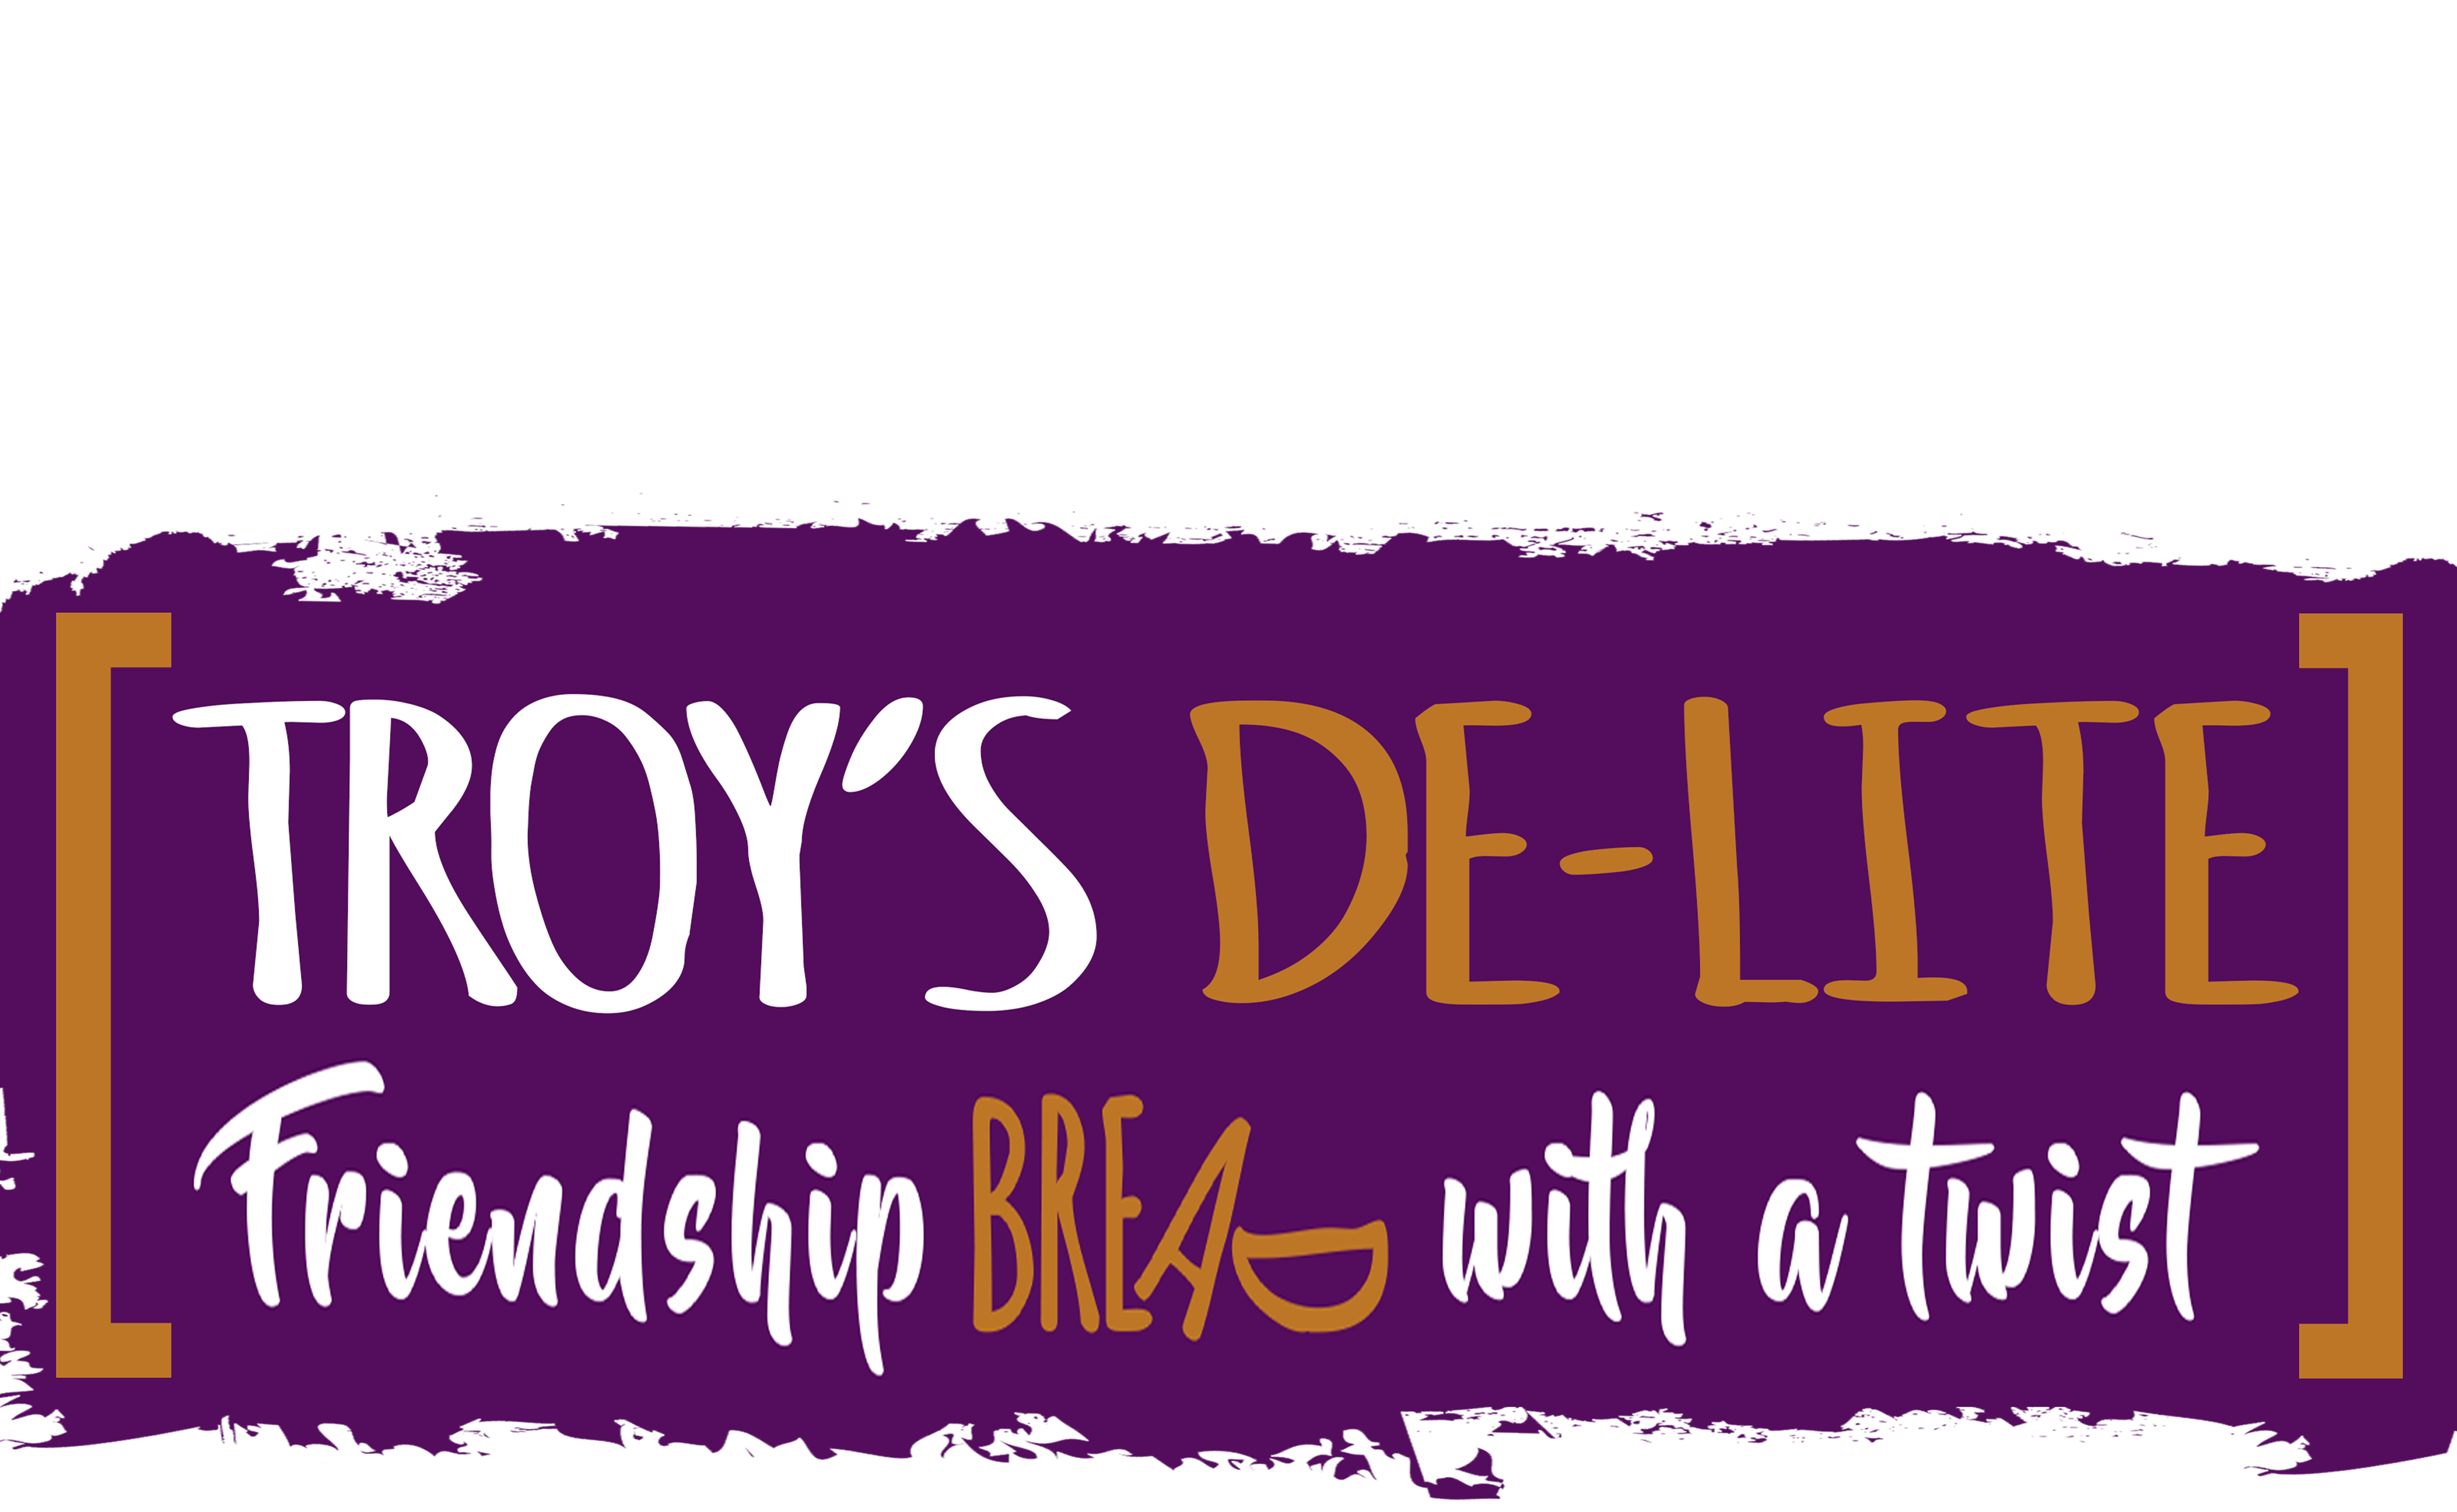 Troy's DeLite | Friendship Bread With a Twist